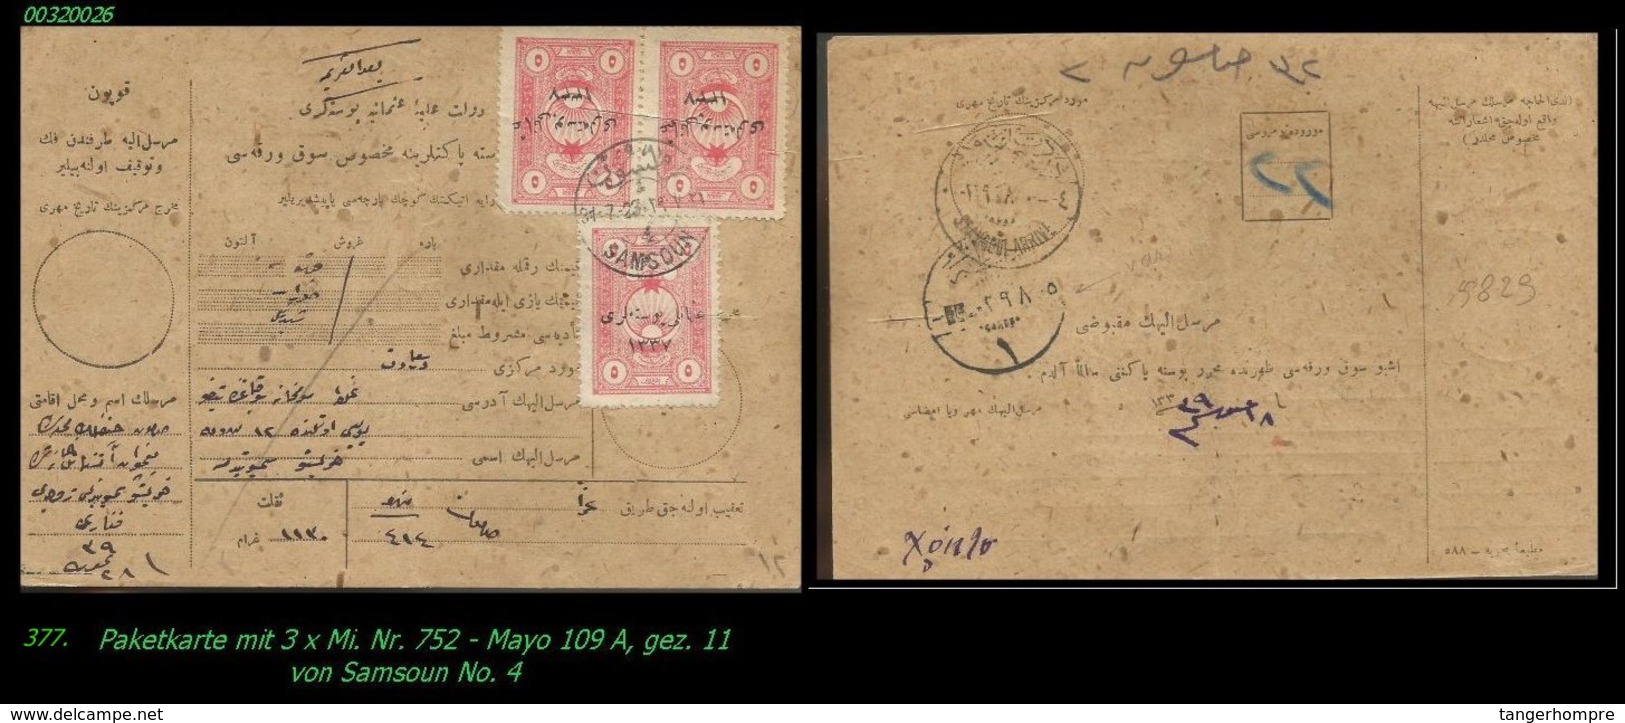 EARLY OTTOMAN SPECIALIZED FOR SPECIALIST, SEE...Mi. Nr. 752 - Mayo 109 - Postanweisung - 1920-21 Kleinasien